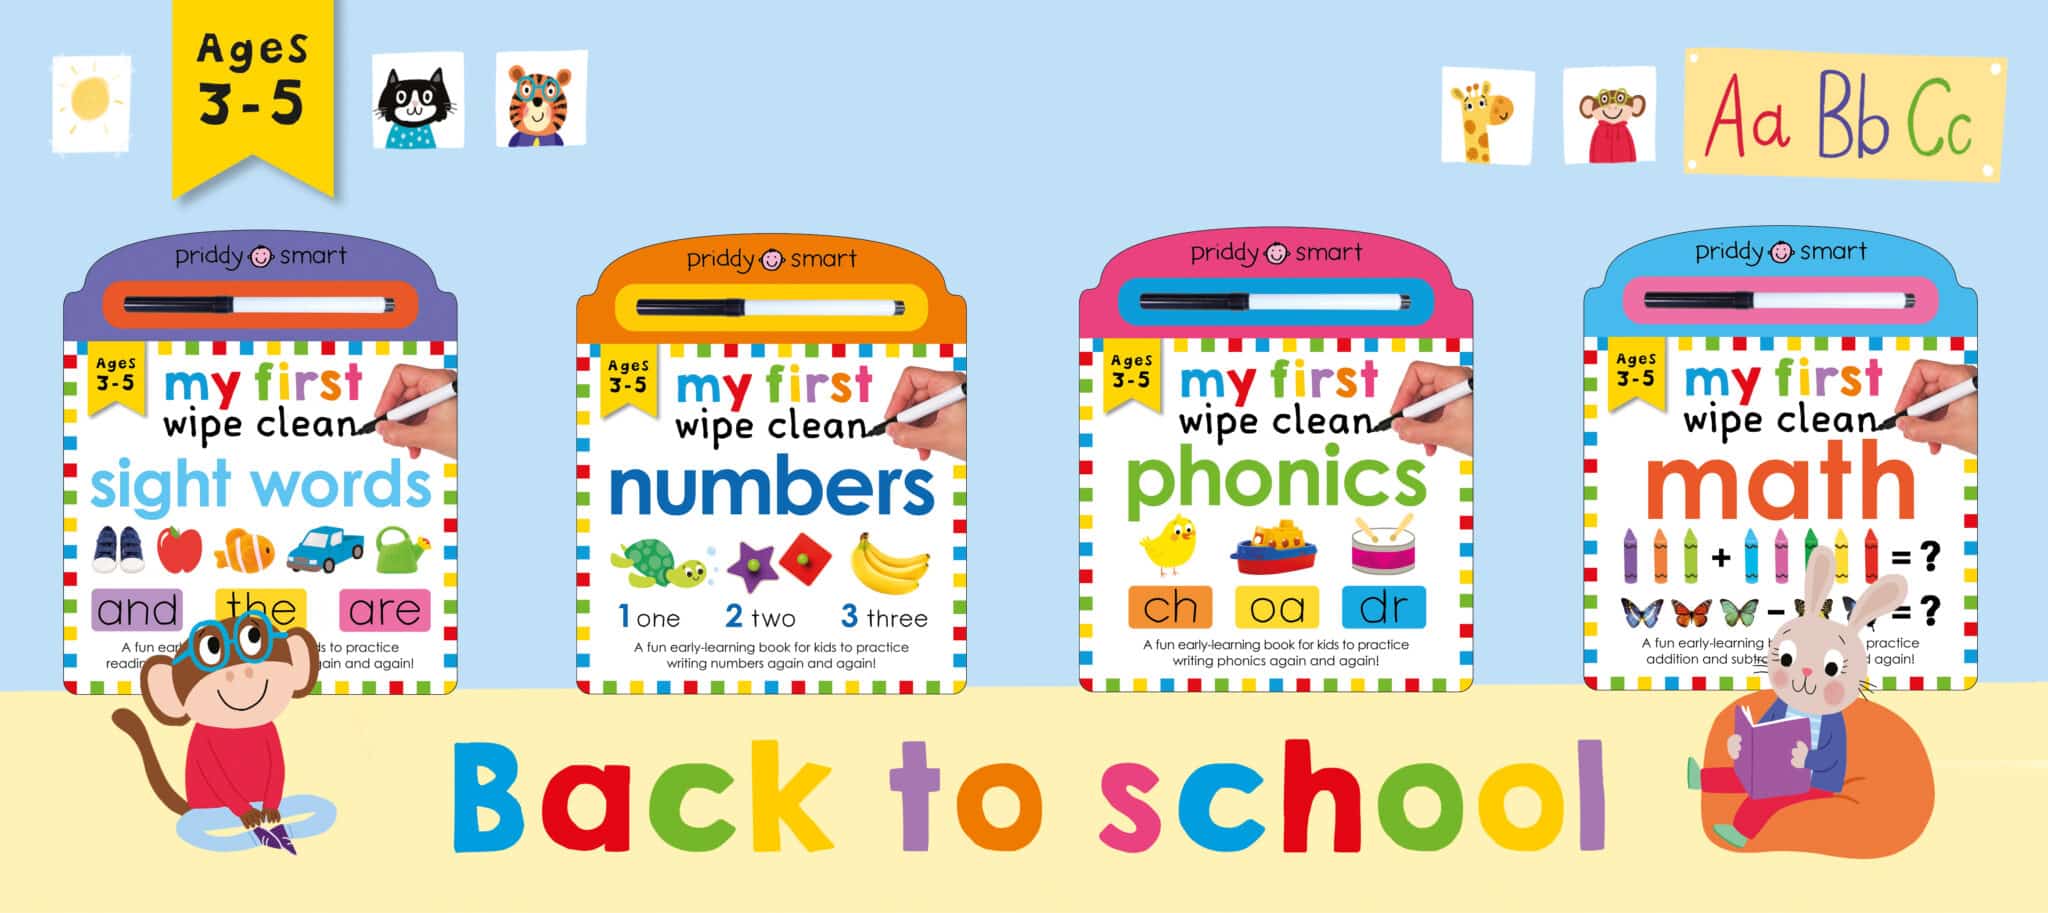 Four colorful educational book covers for ages 3-5 featuring "my first wipe clean" sight words, numbers, phonics, and math, with a "back to school" banner and a cartoon monkey reading a book.